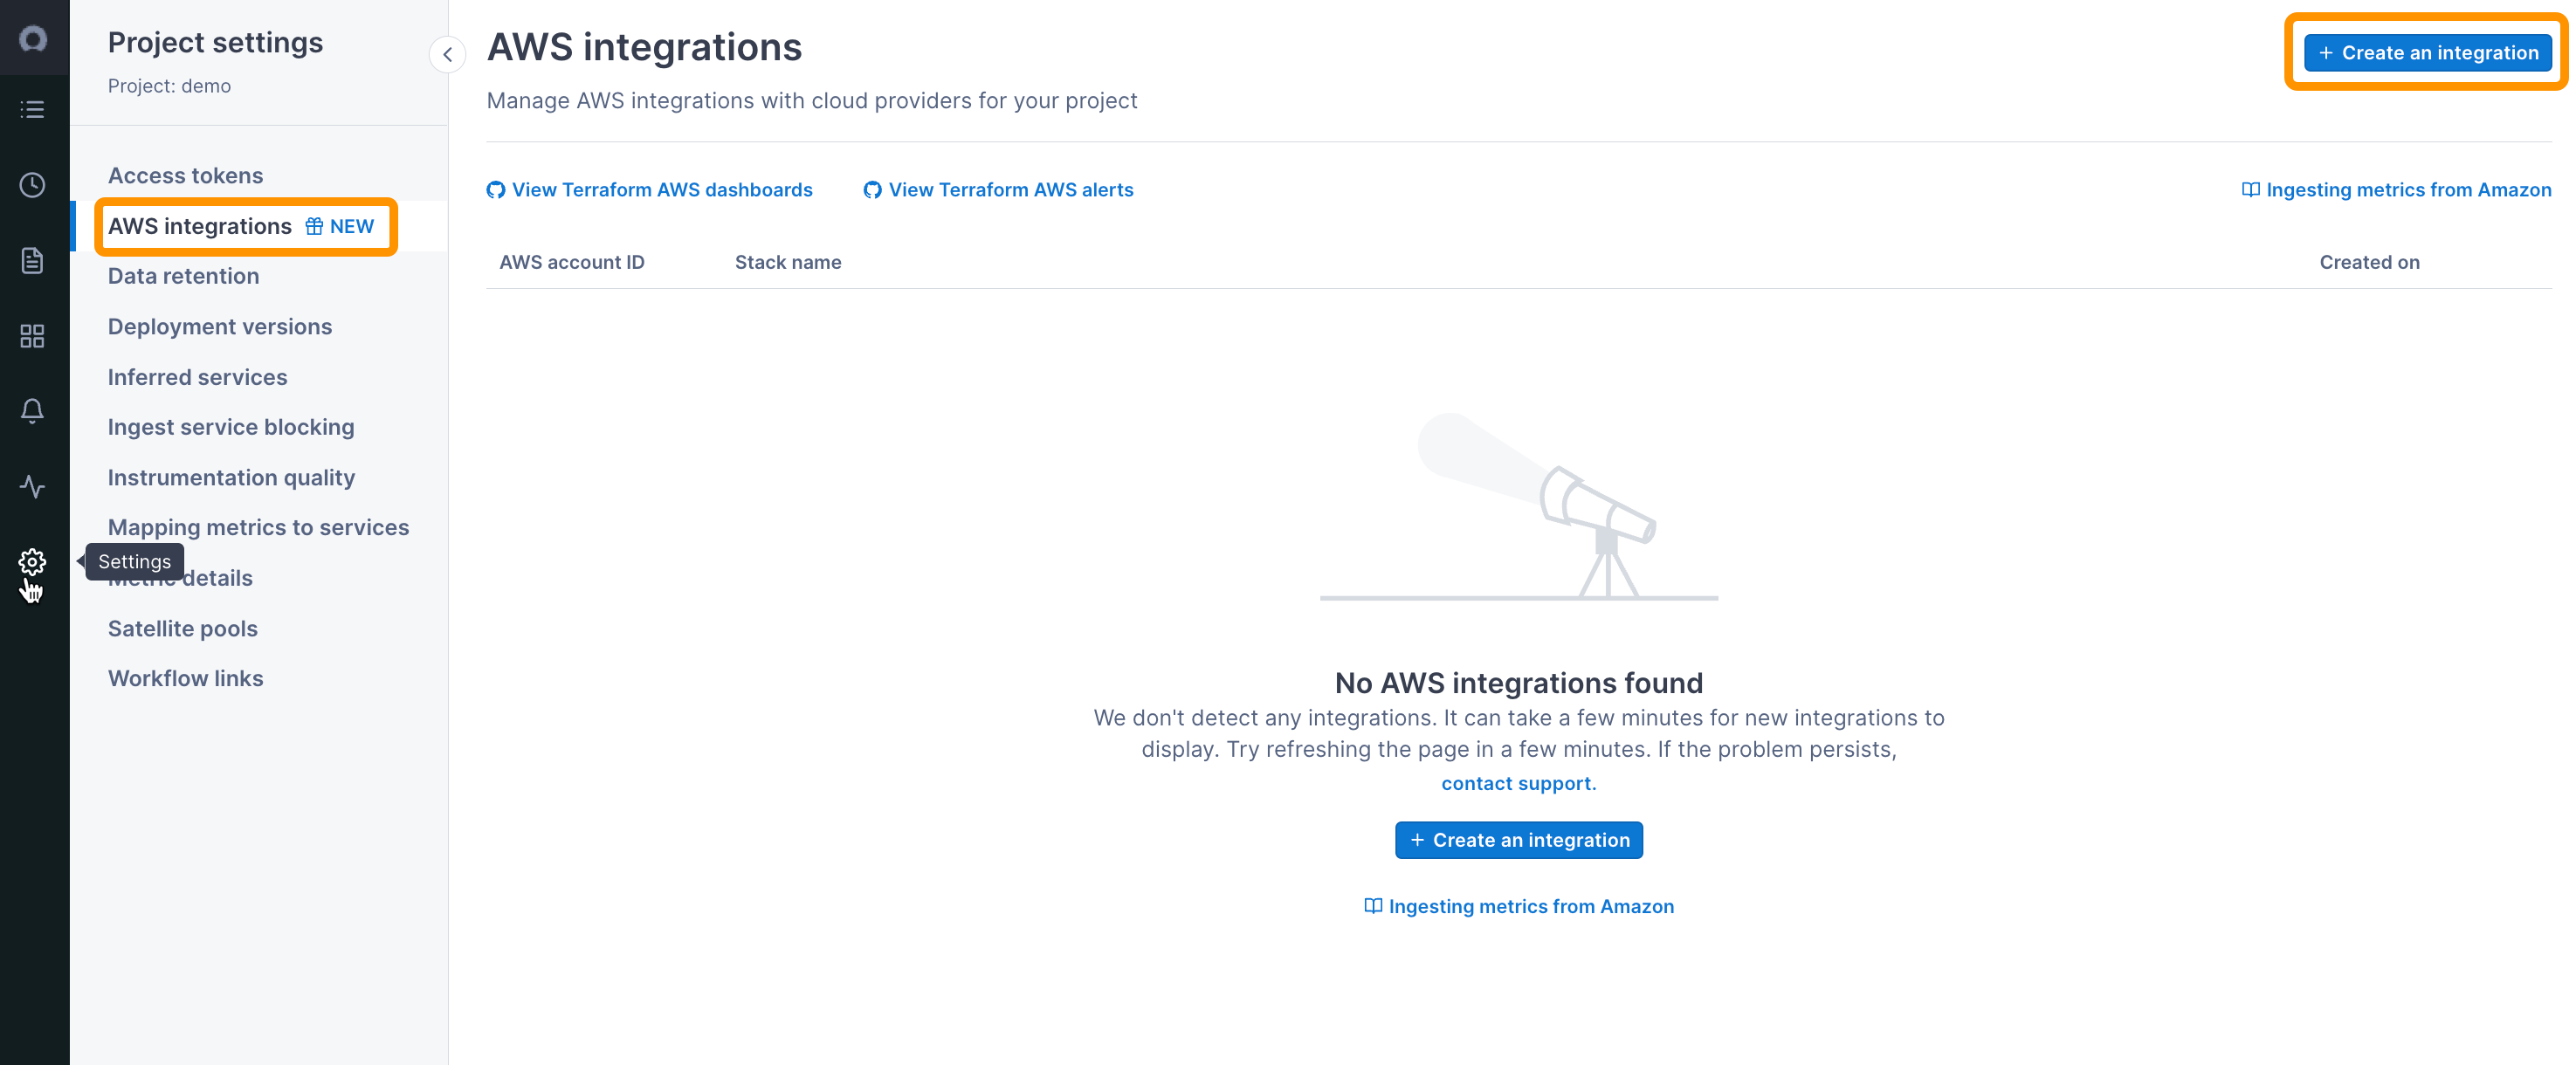 AWS integrations page